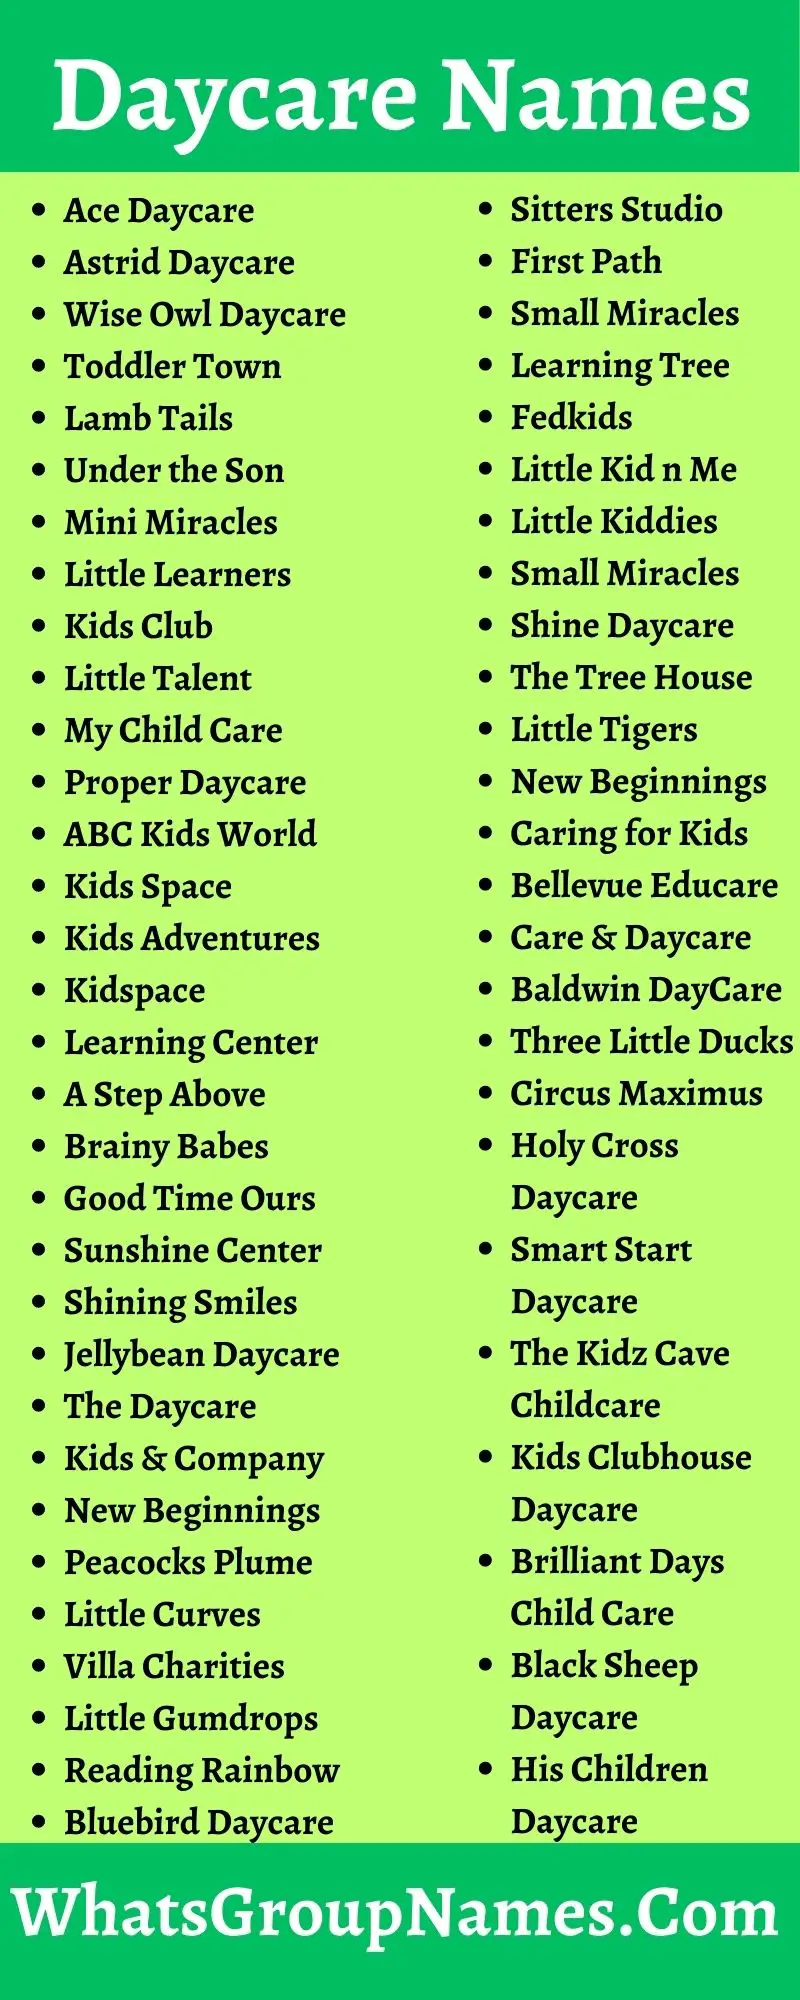 Daycare Names